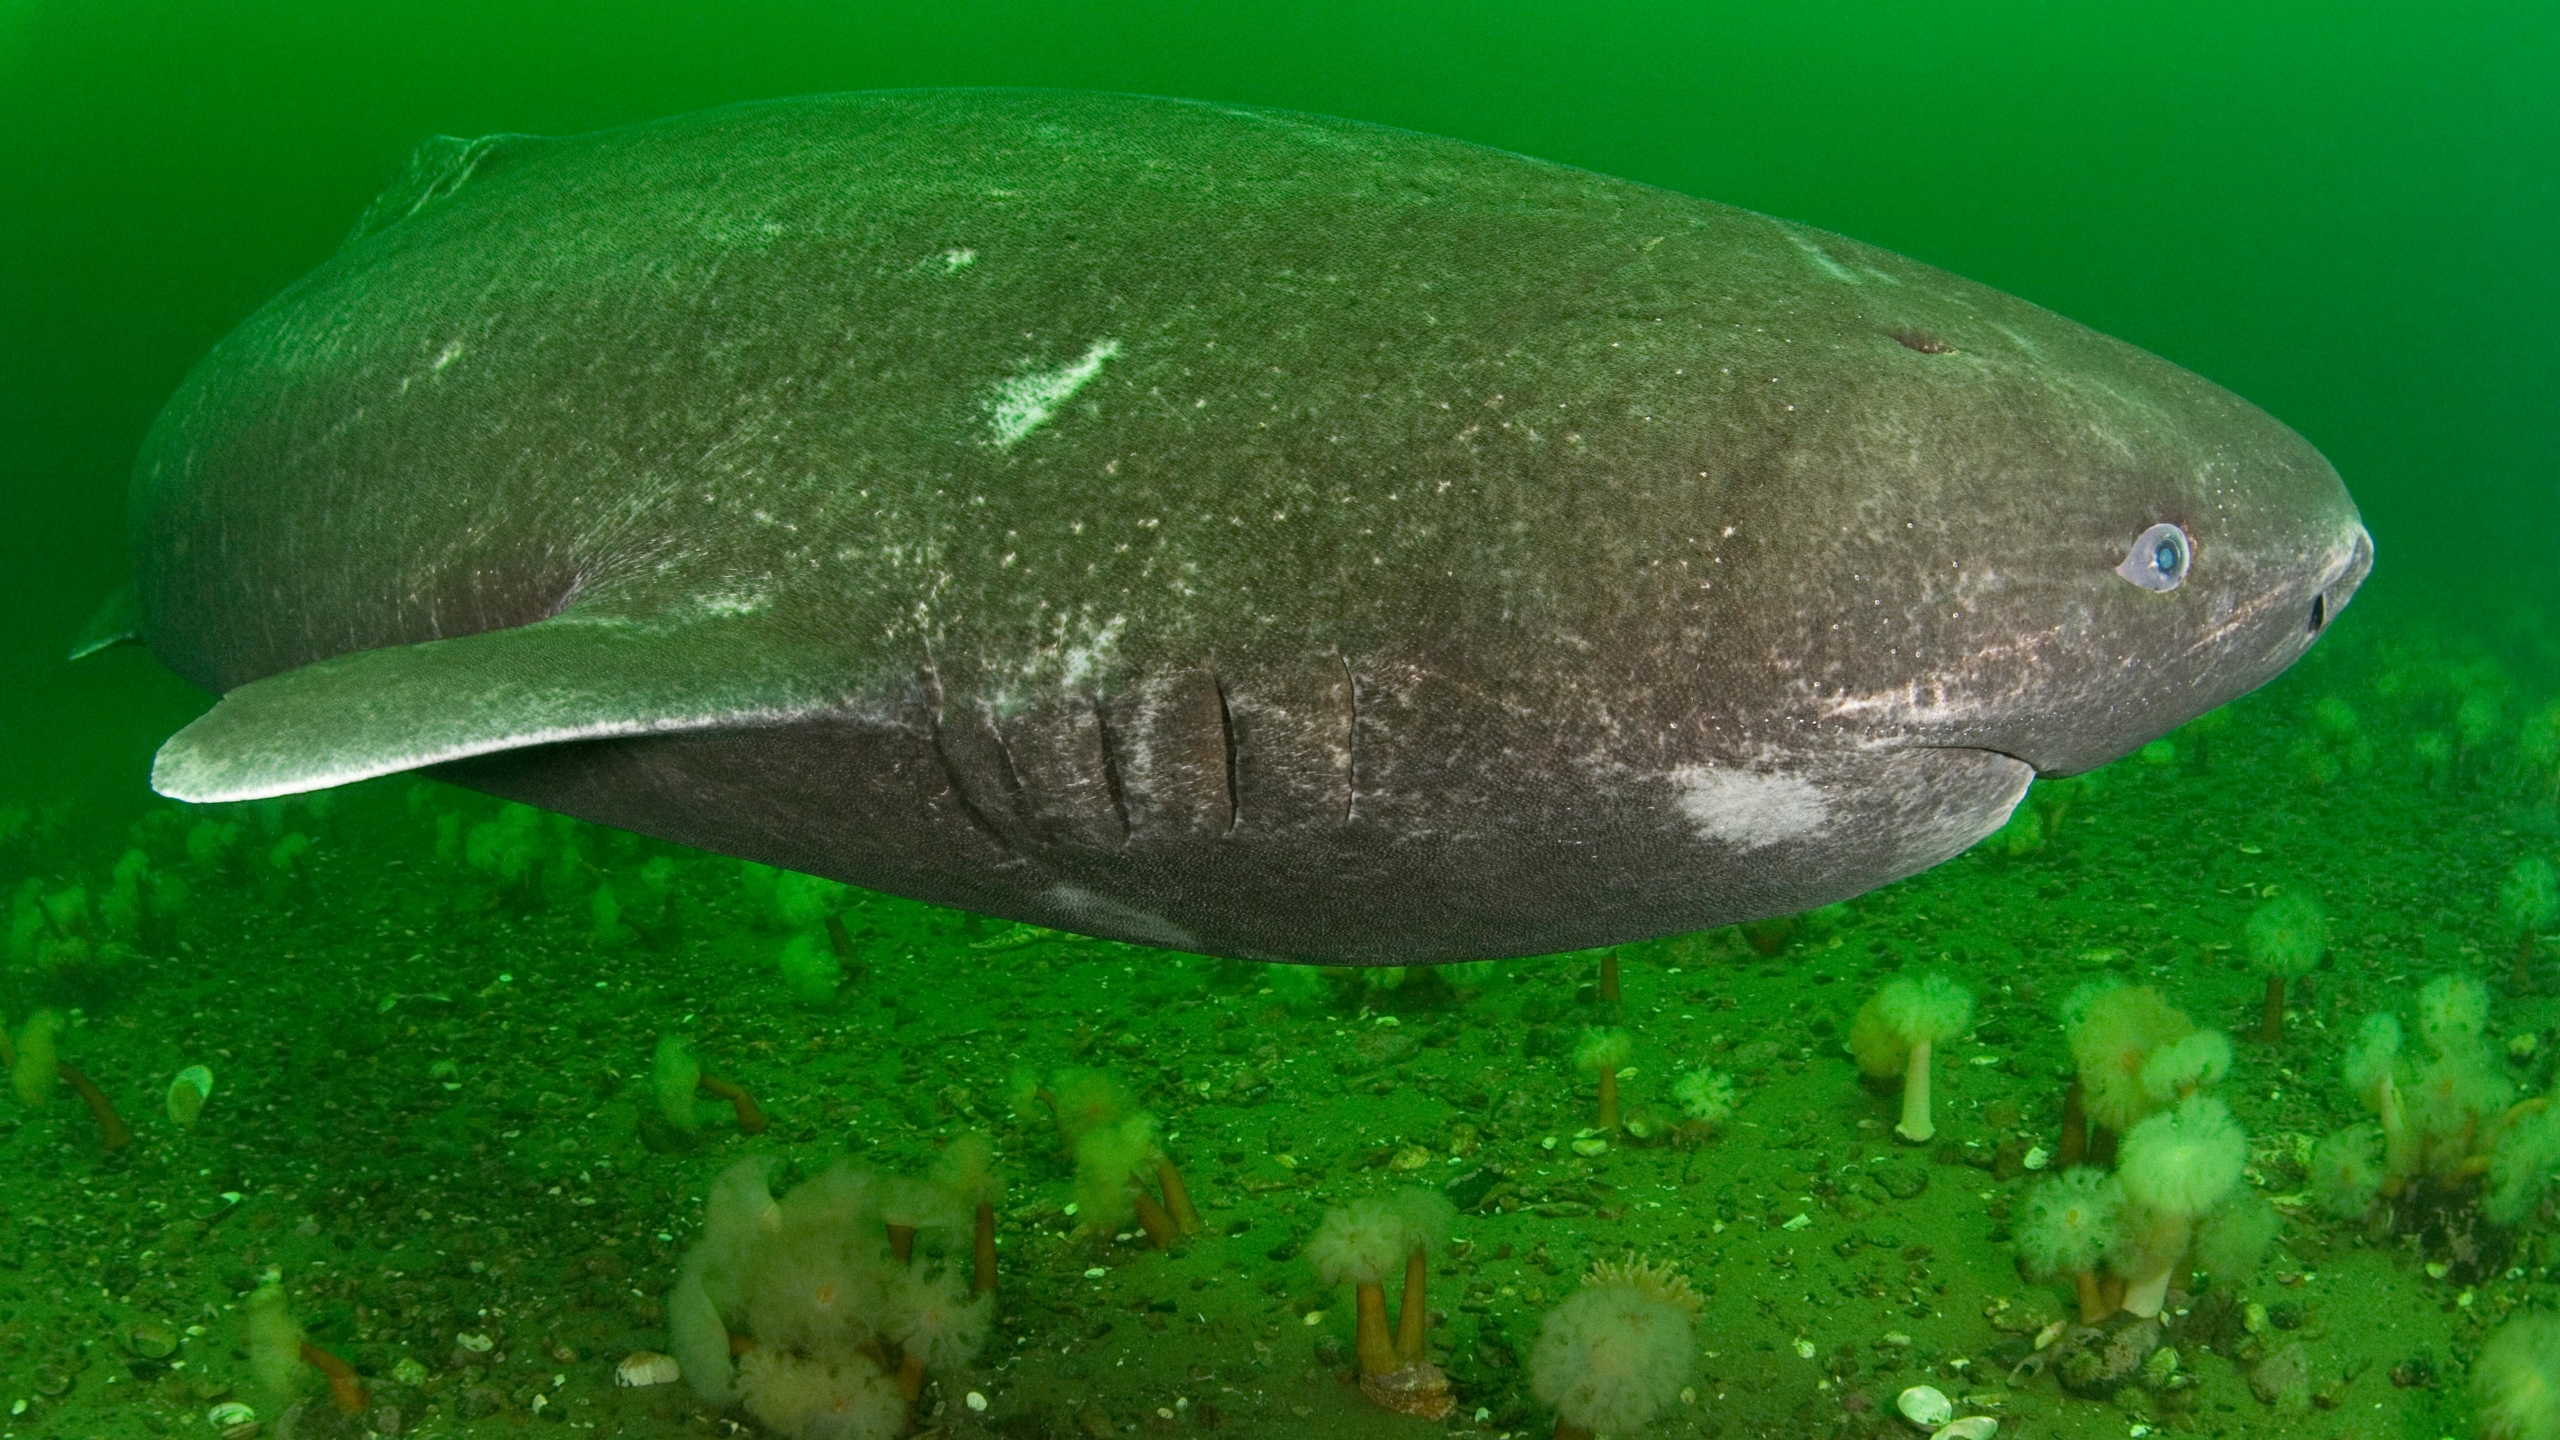 A Greenland shark swimming in the St. Lawrence River estuary in Canada.